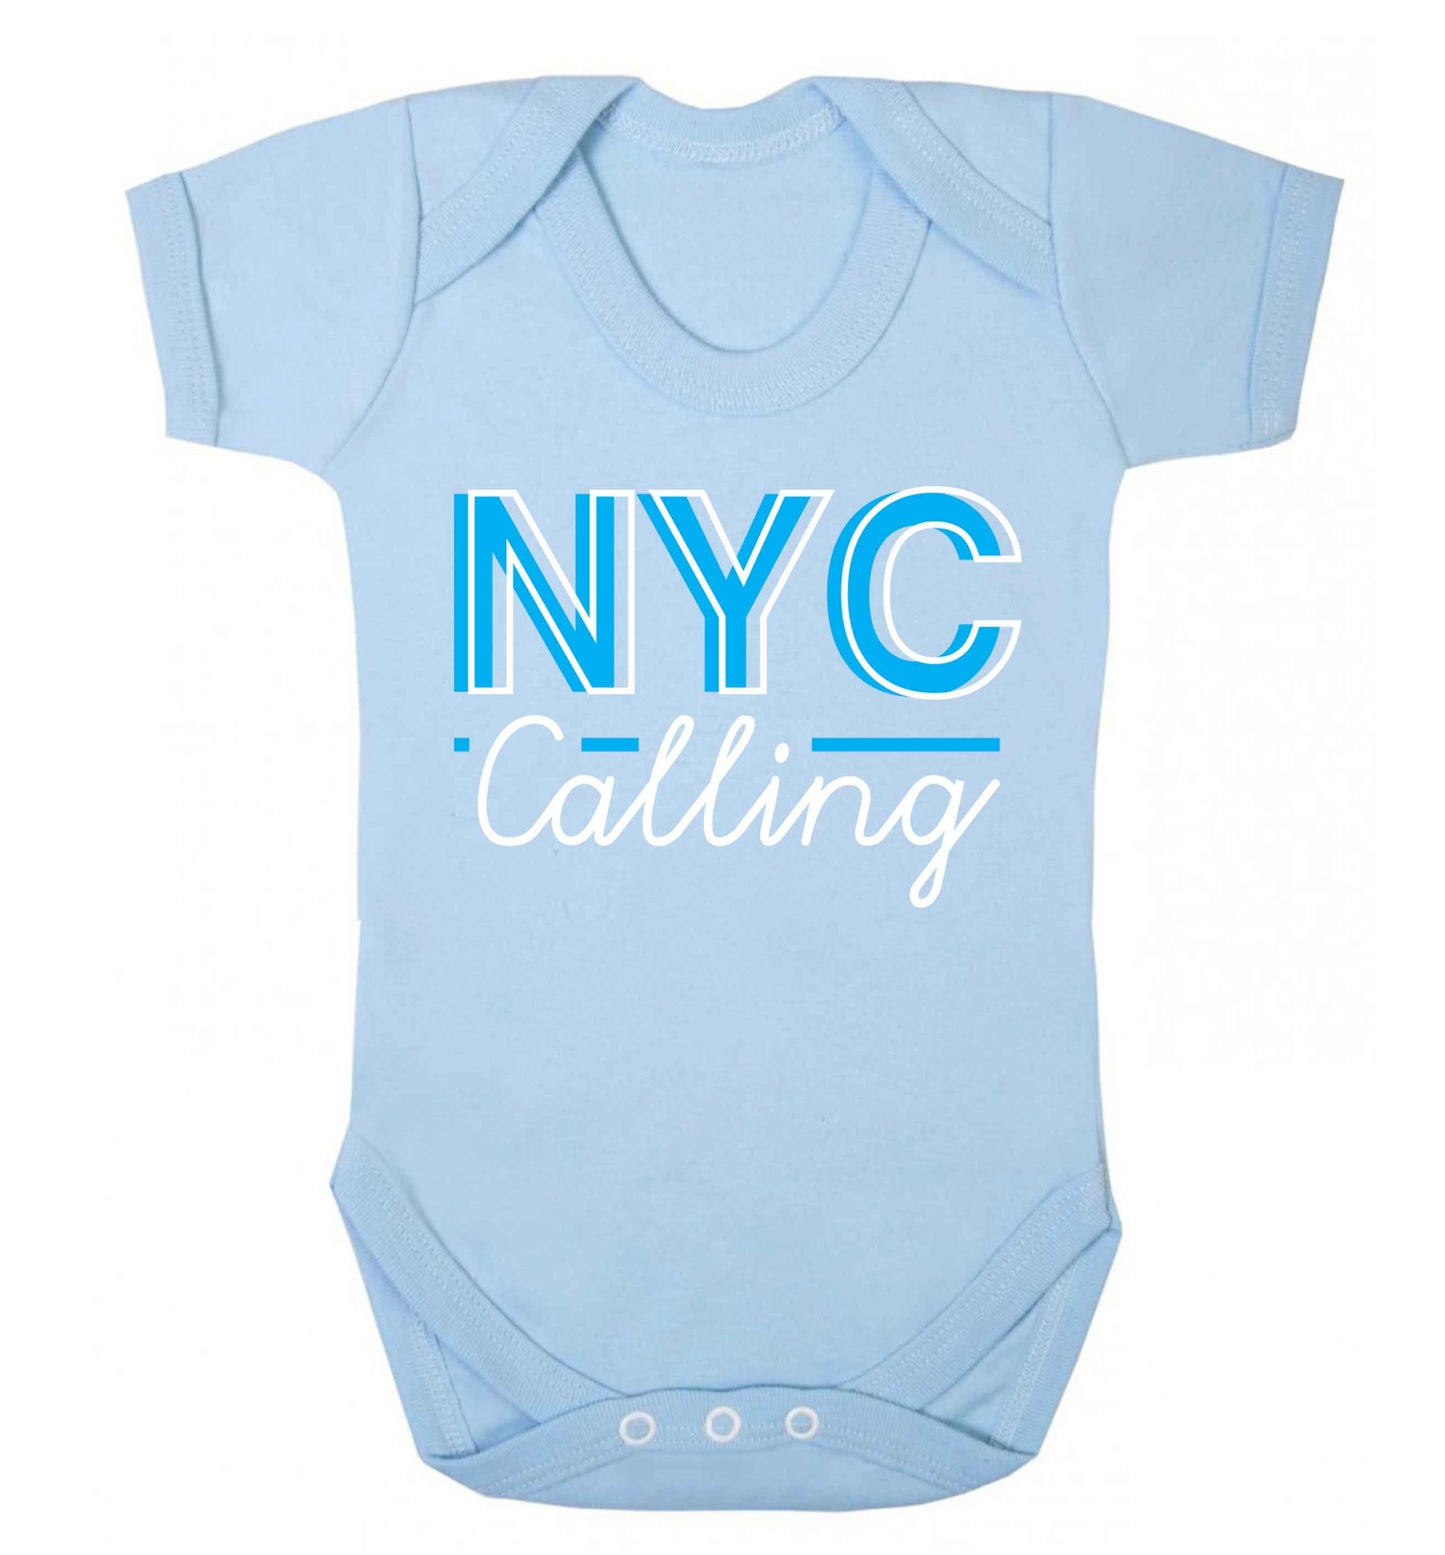 NYC calling Baby Vest pale blue 18-24 months